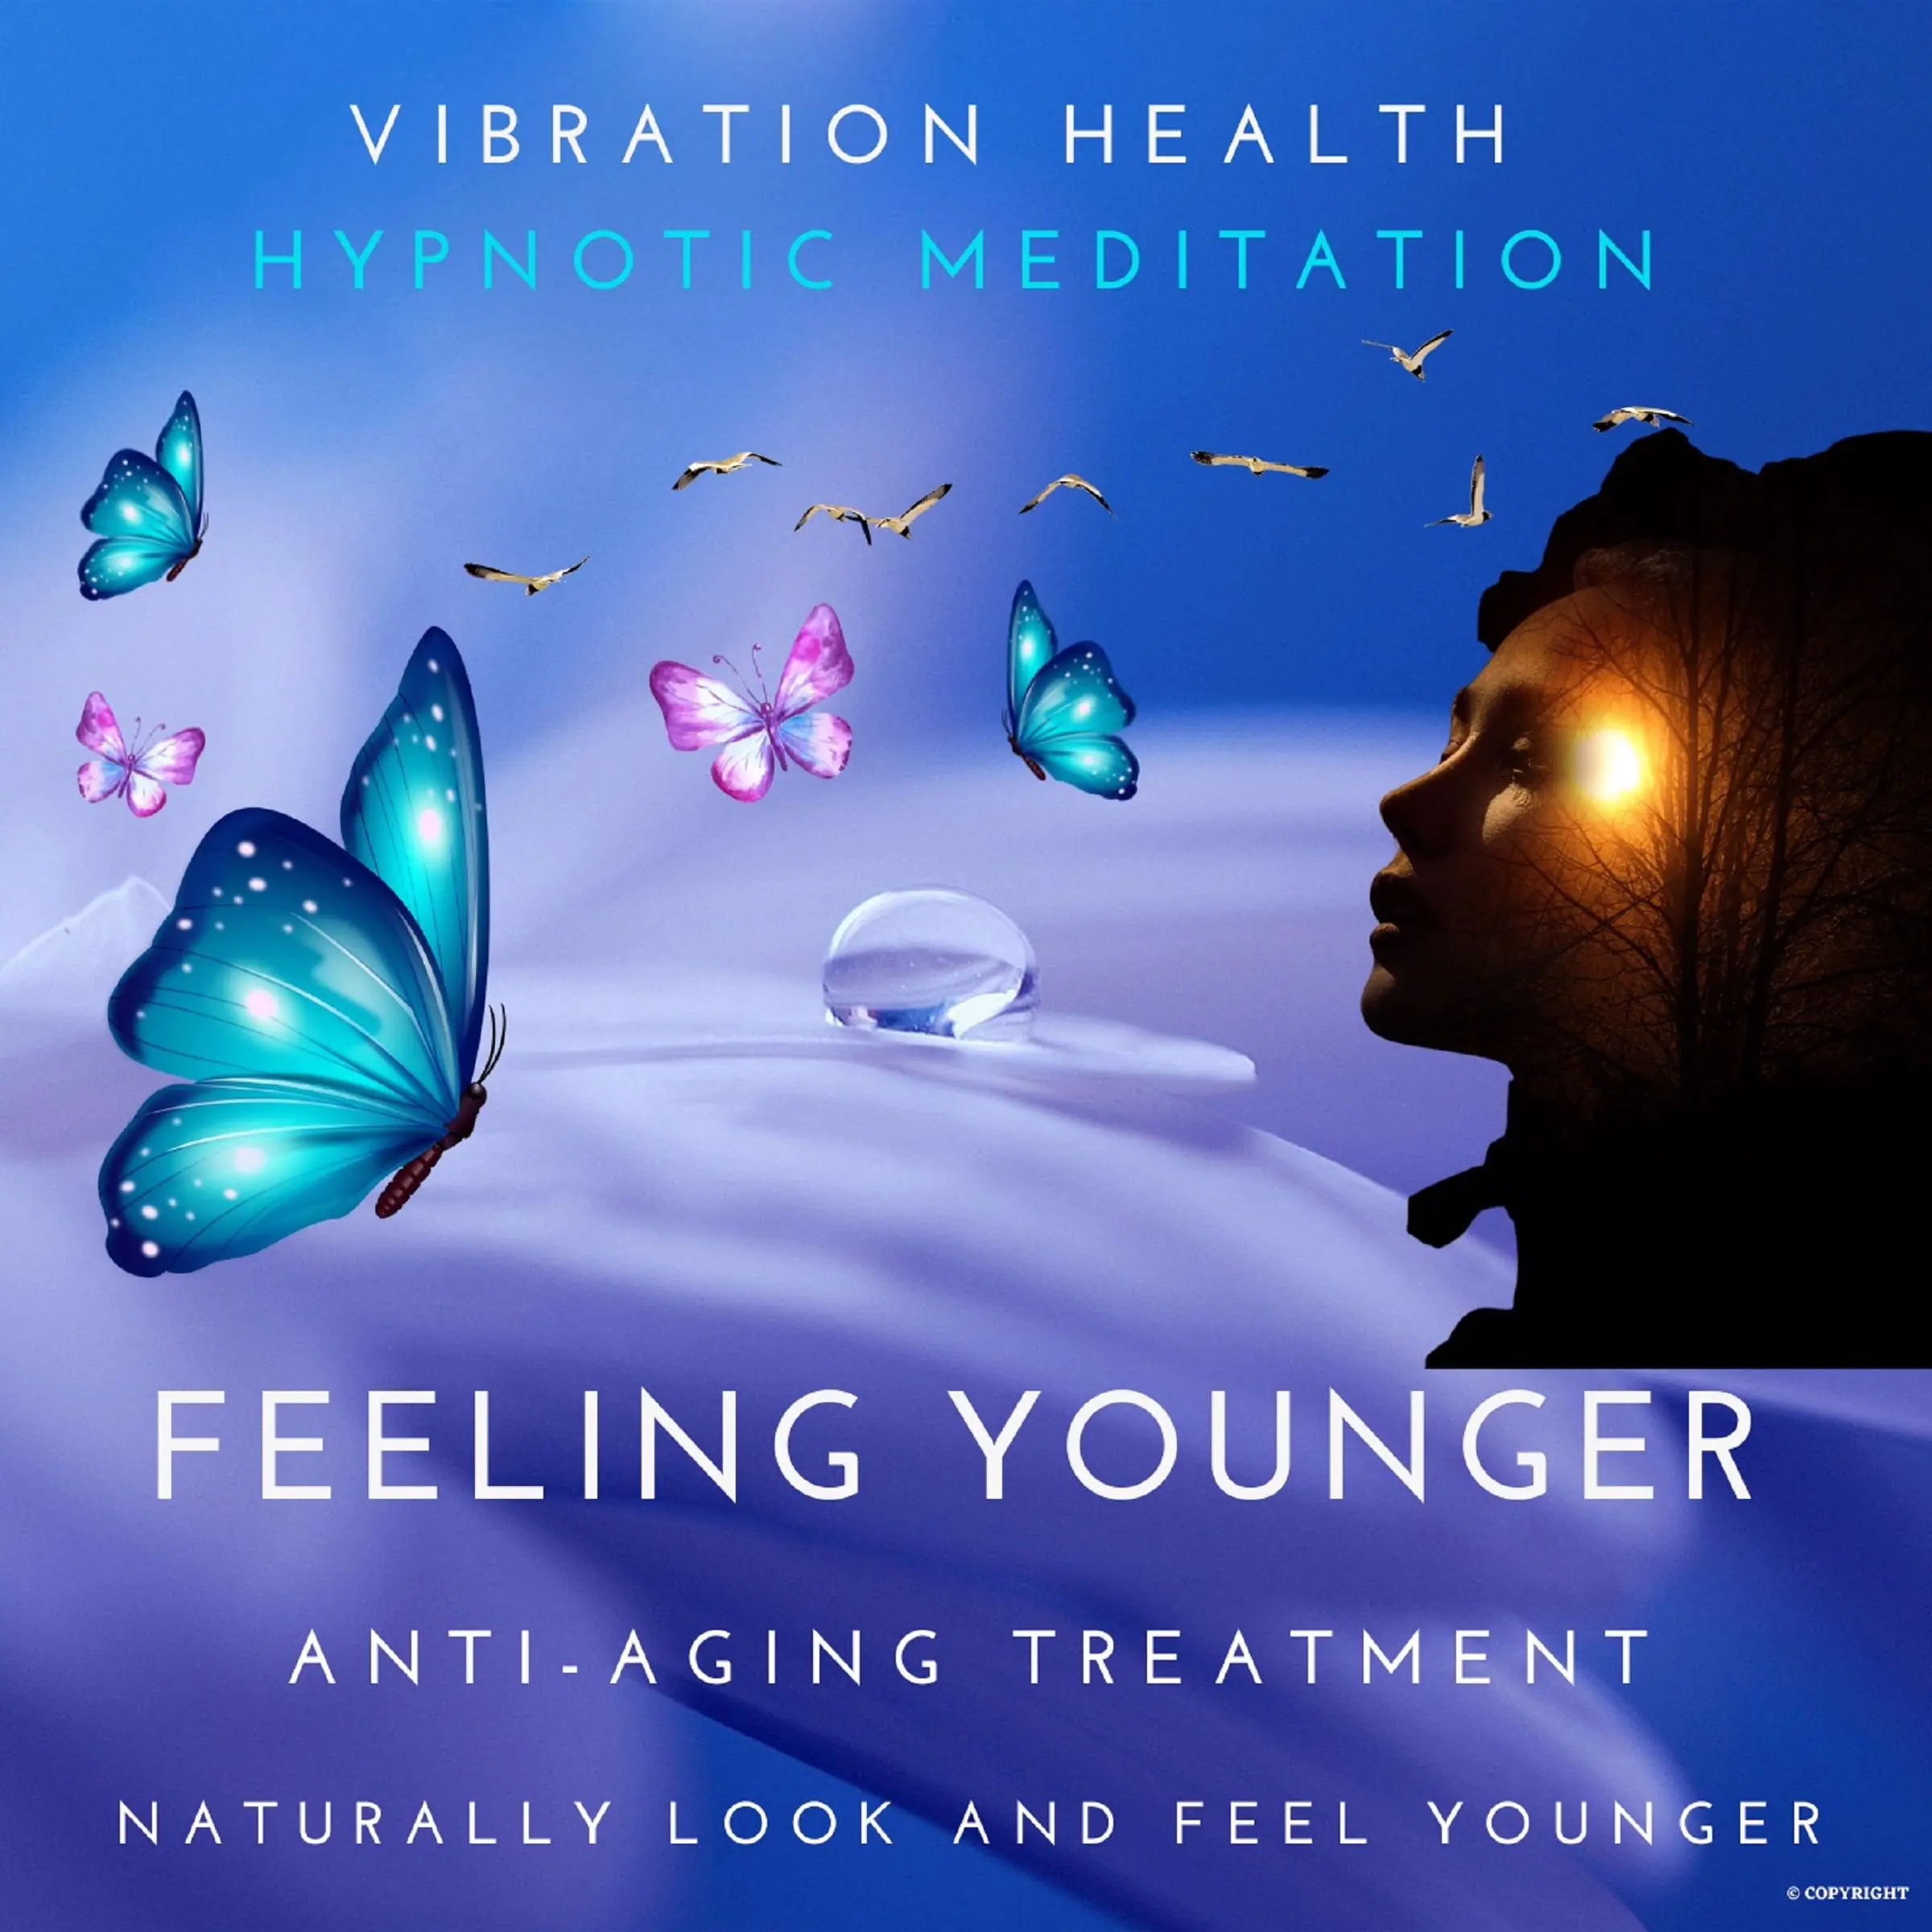 Feeling Younger Audiobook by Vibration Health Hypnotic Meditation